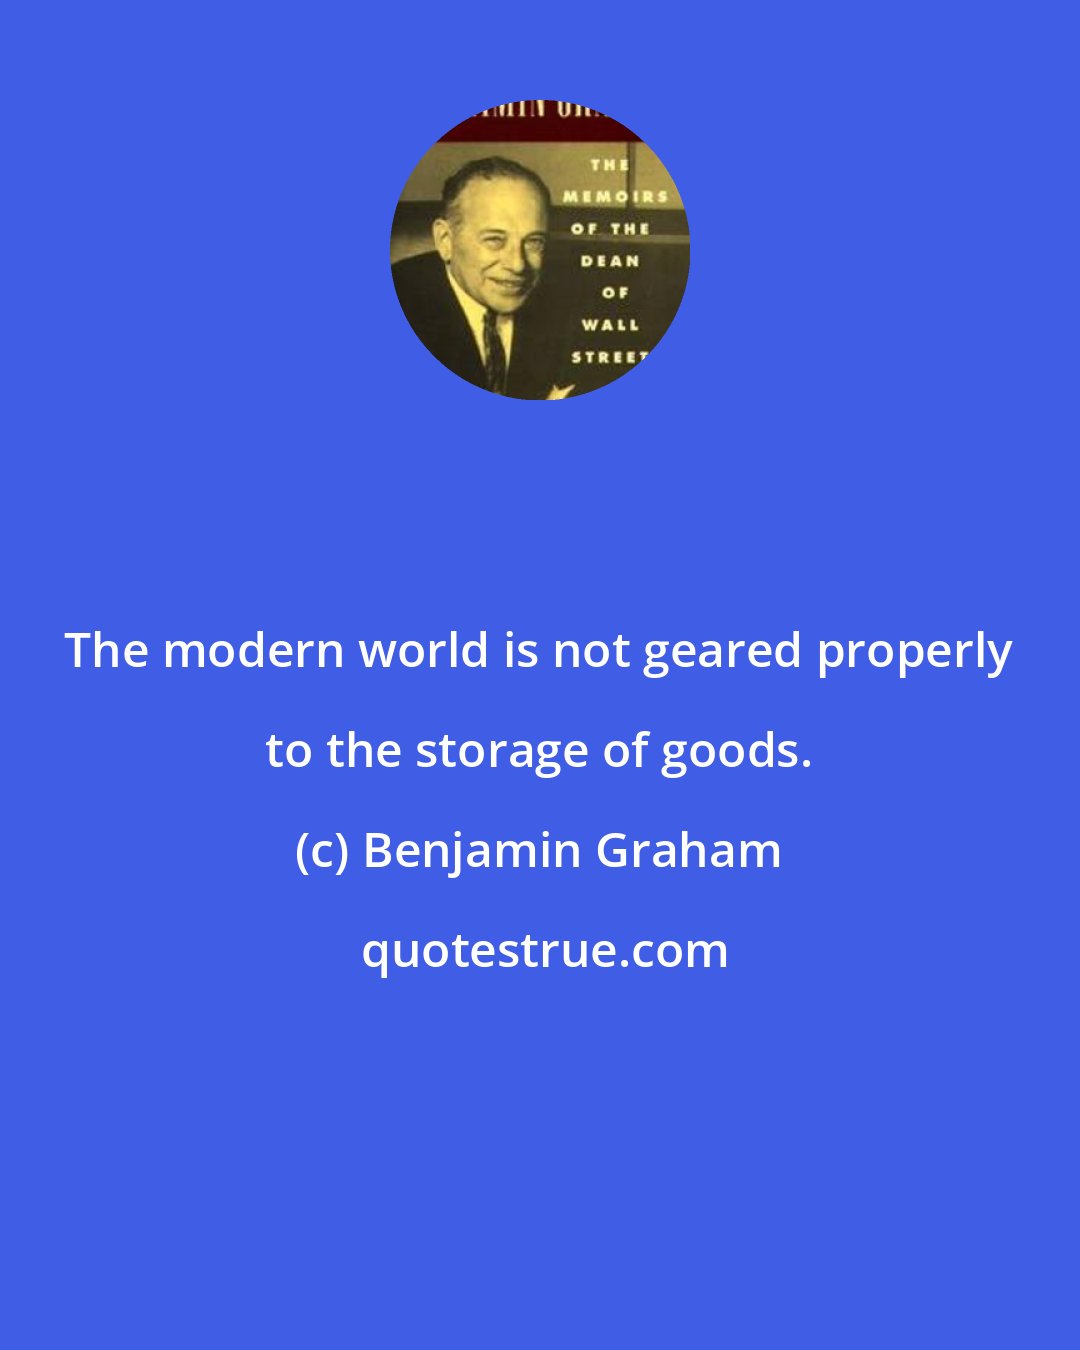 Benjamin Graham: The modern world is not geared properly to the storage of goods.